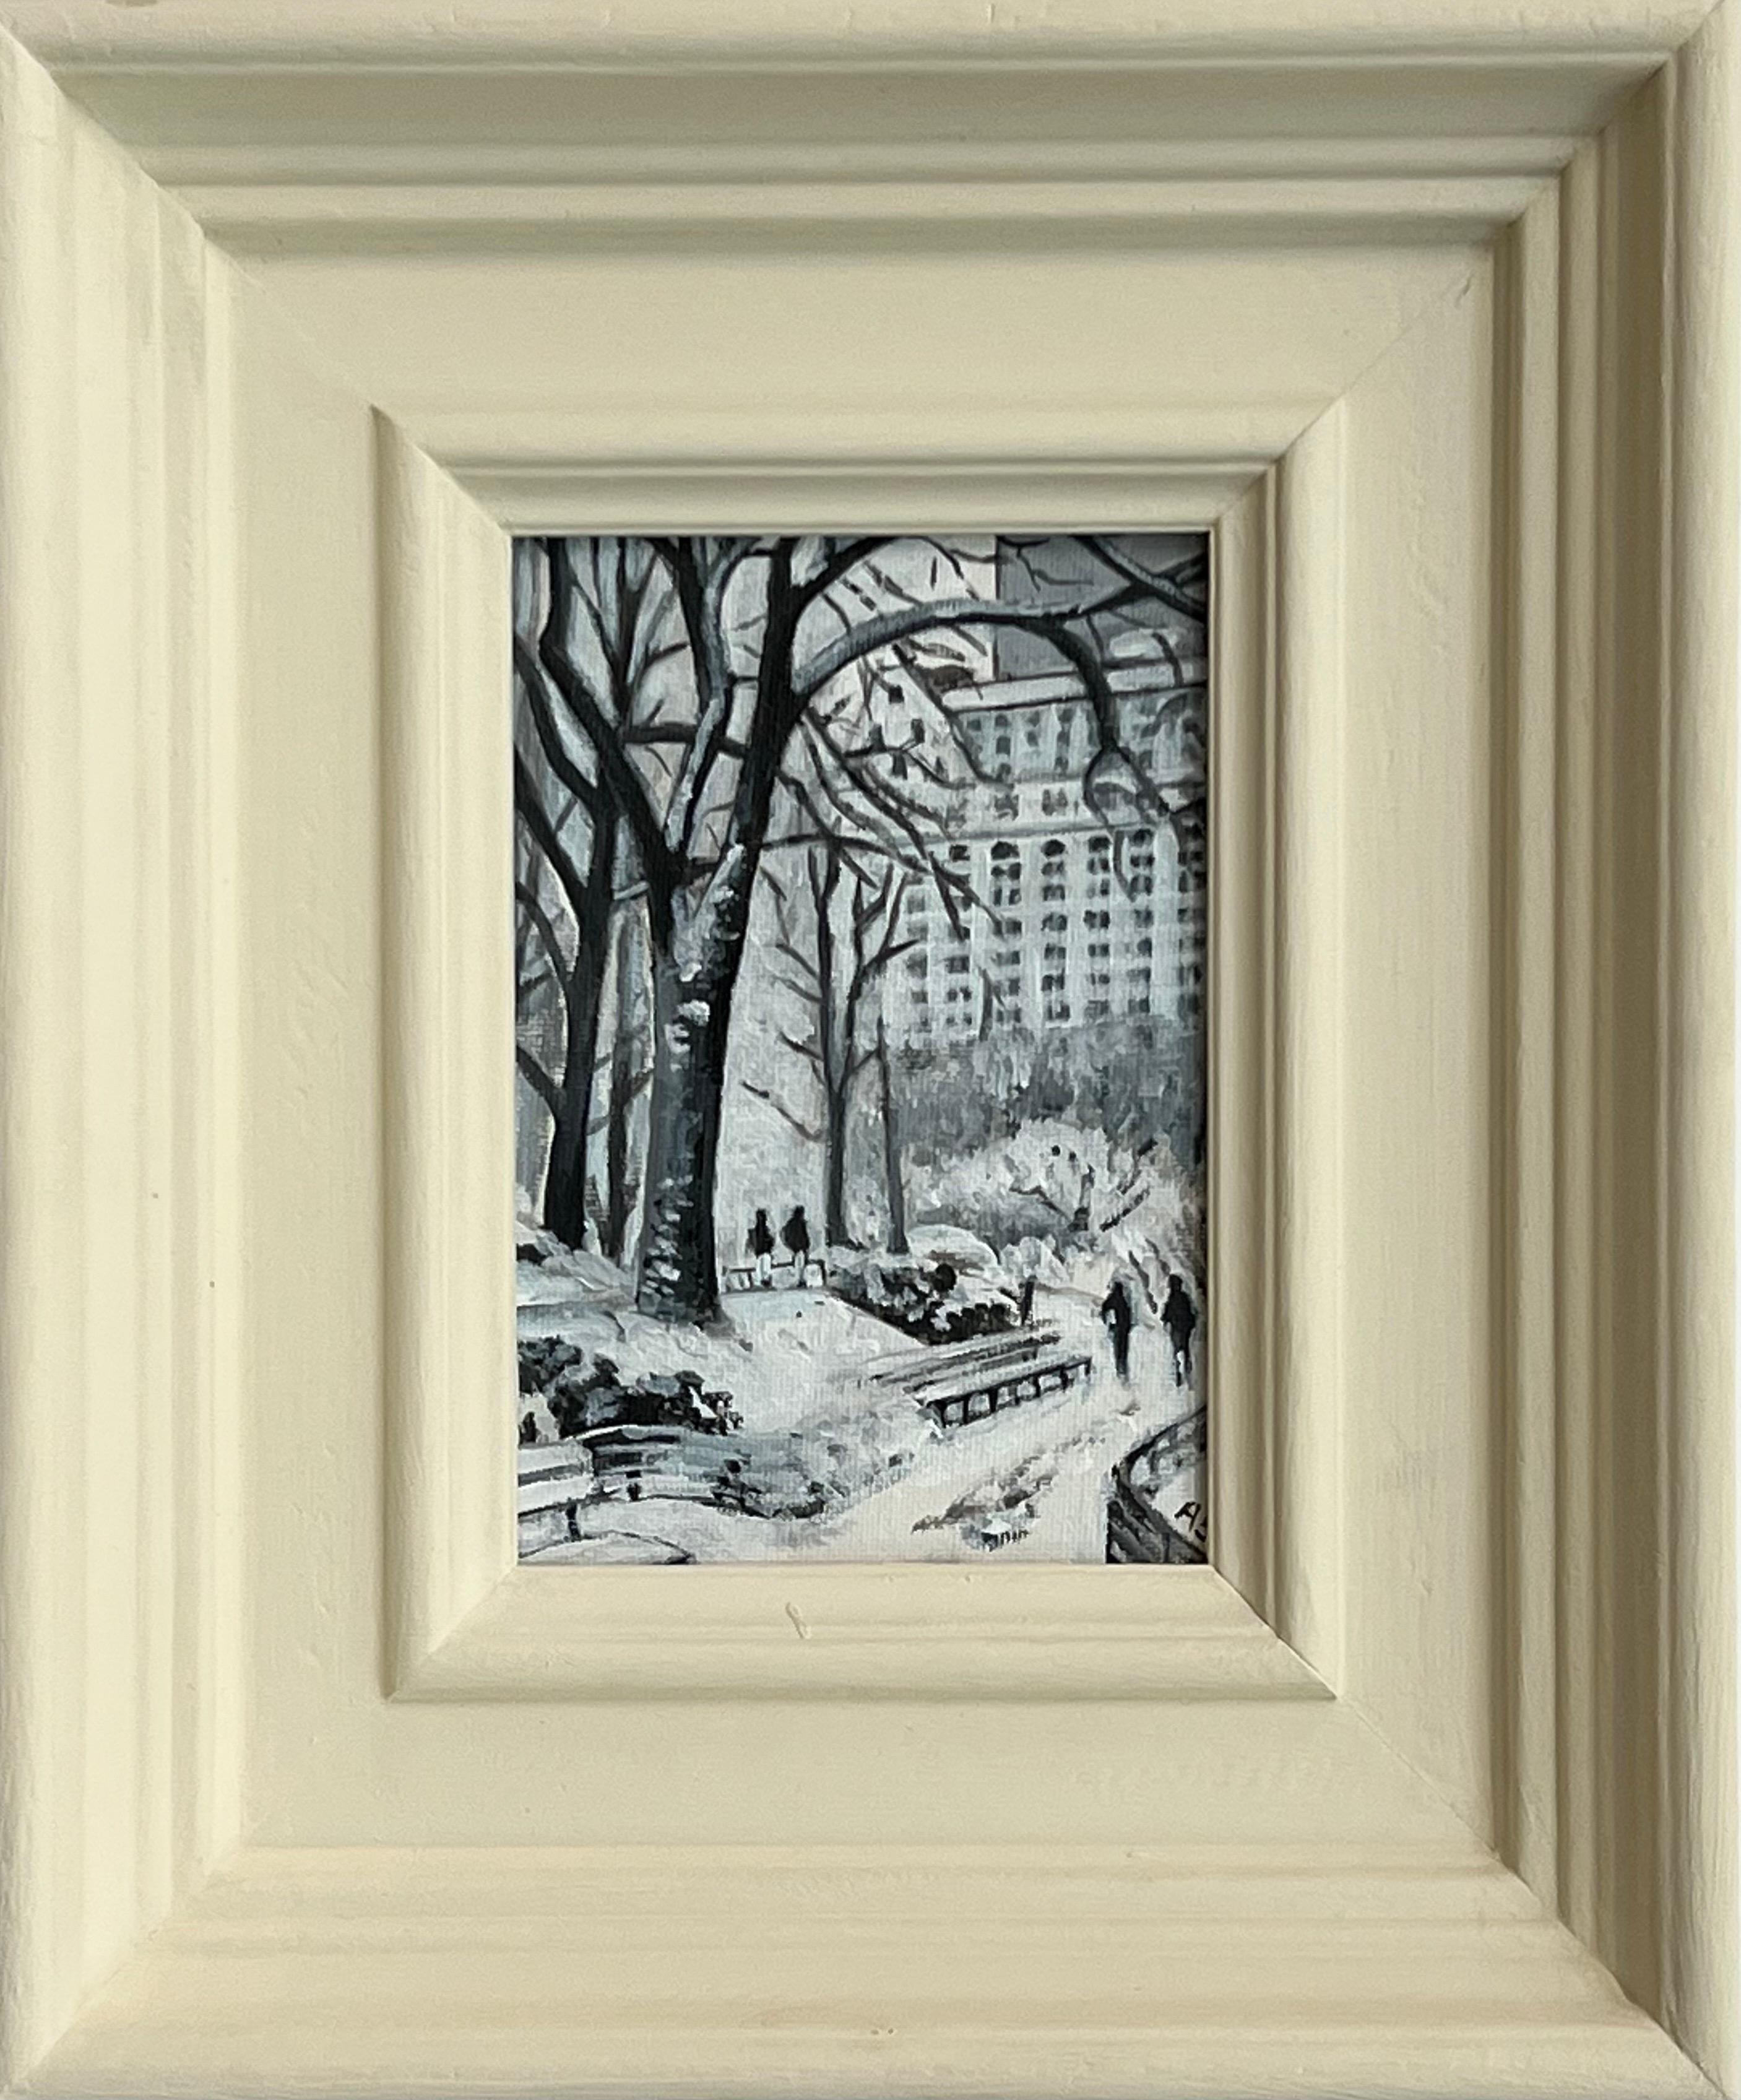 Angela Wakefield Figurative Painting - Miniature Study Central Park New York City Winter by Contemporary British Artist